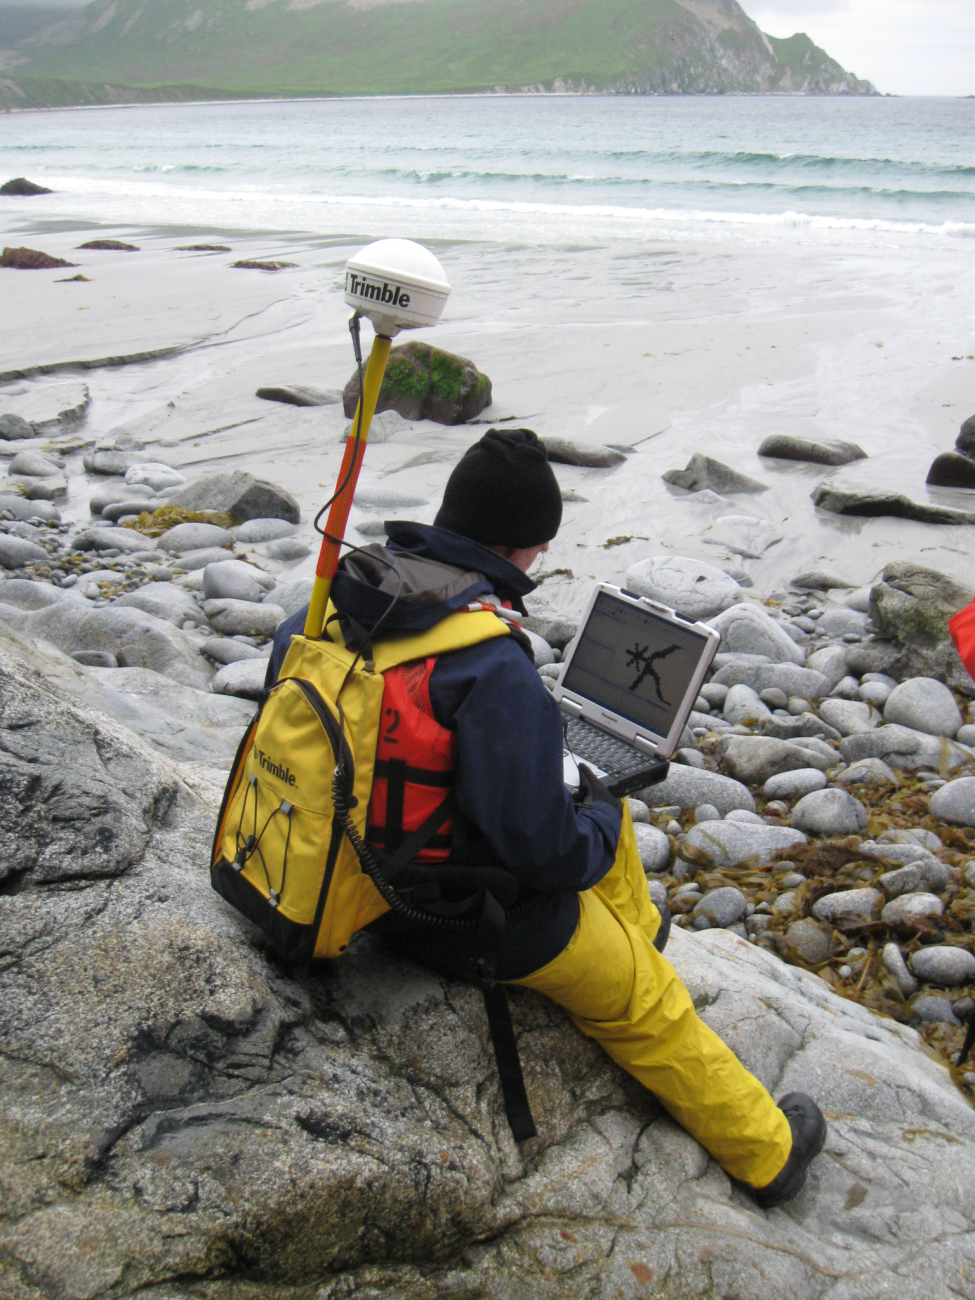 Portable backpack mounted GPS receiver used in shoreline mapping